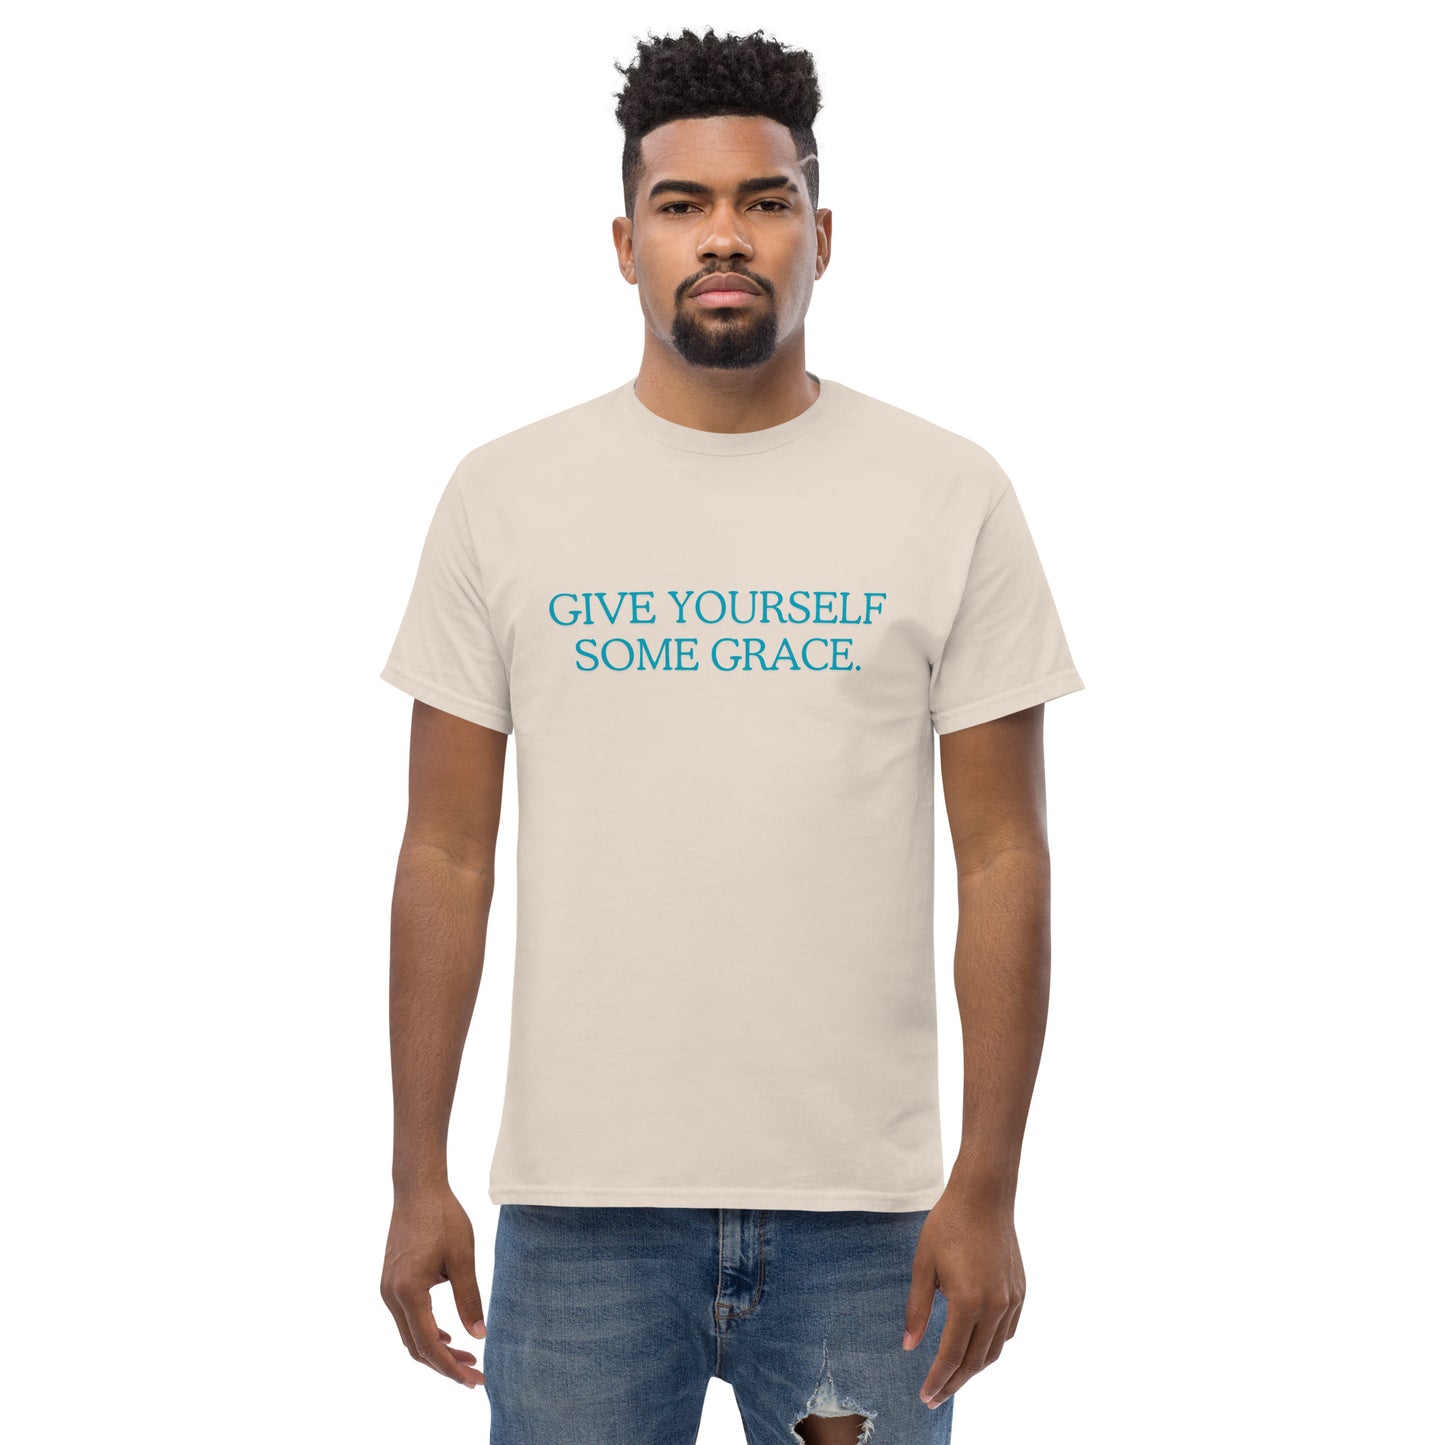 'Give Yourself Some Grace' Men's classic tee